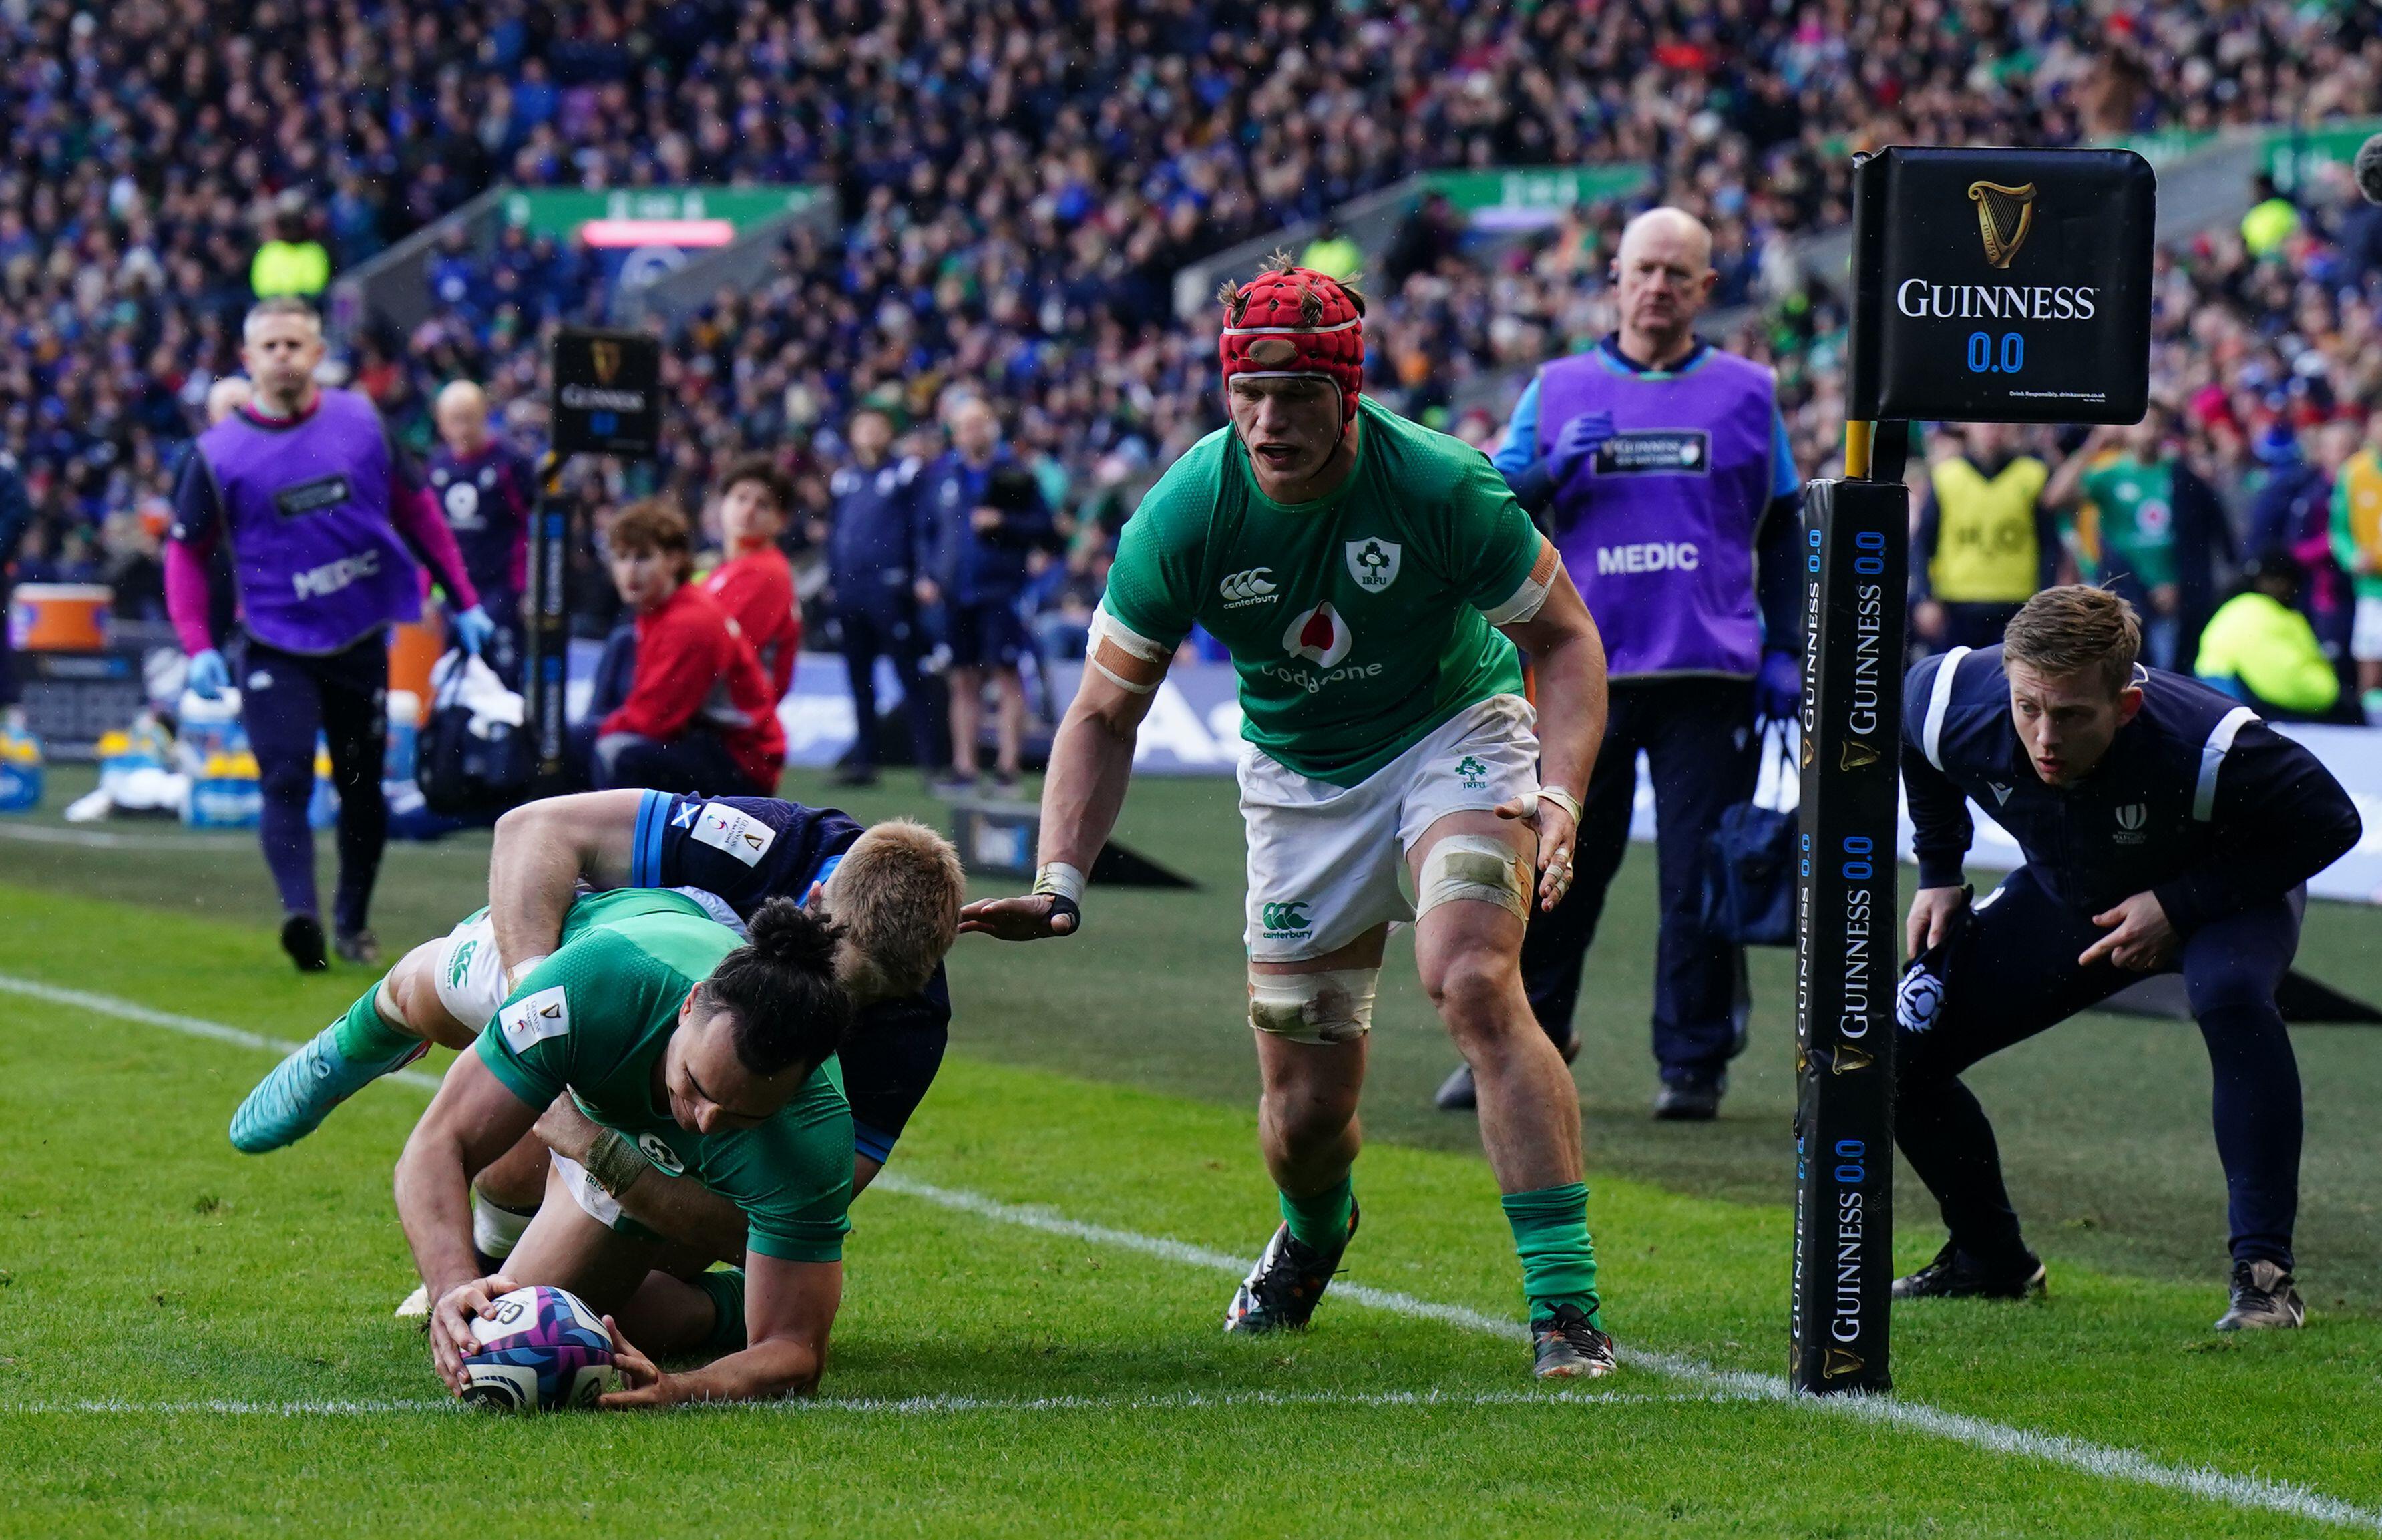 Irish Rugby  Ireland Change To Navy Shorts To Ease Period Concerns